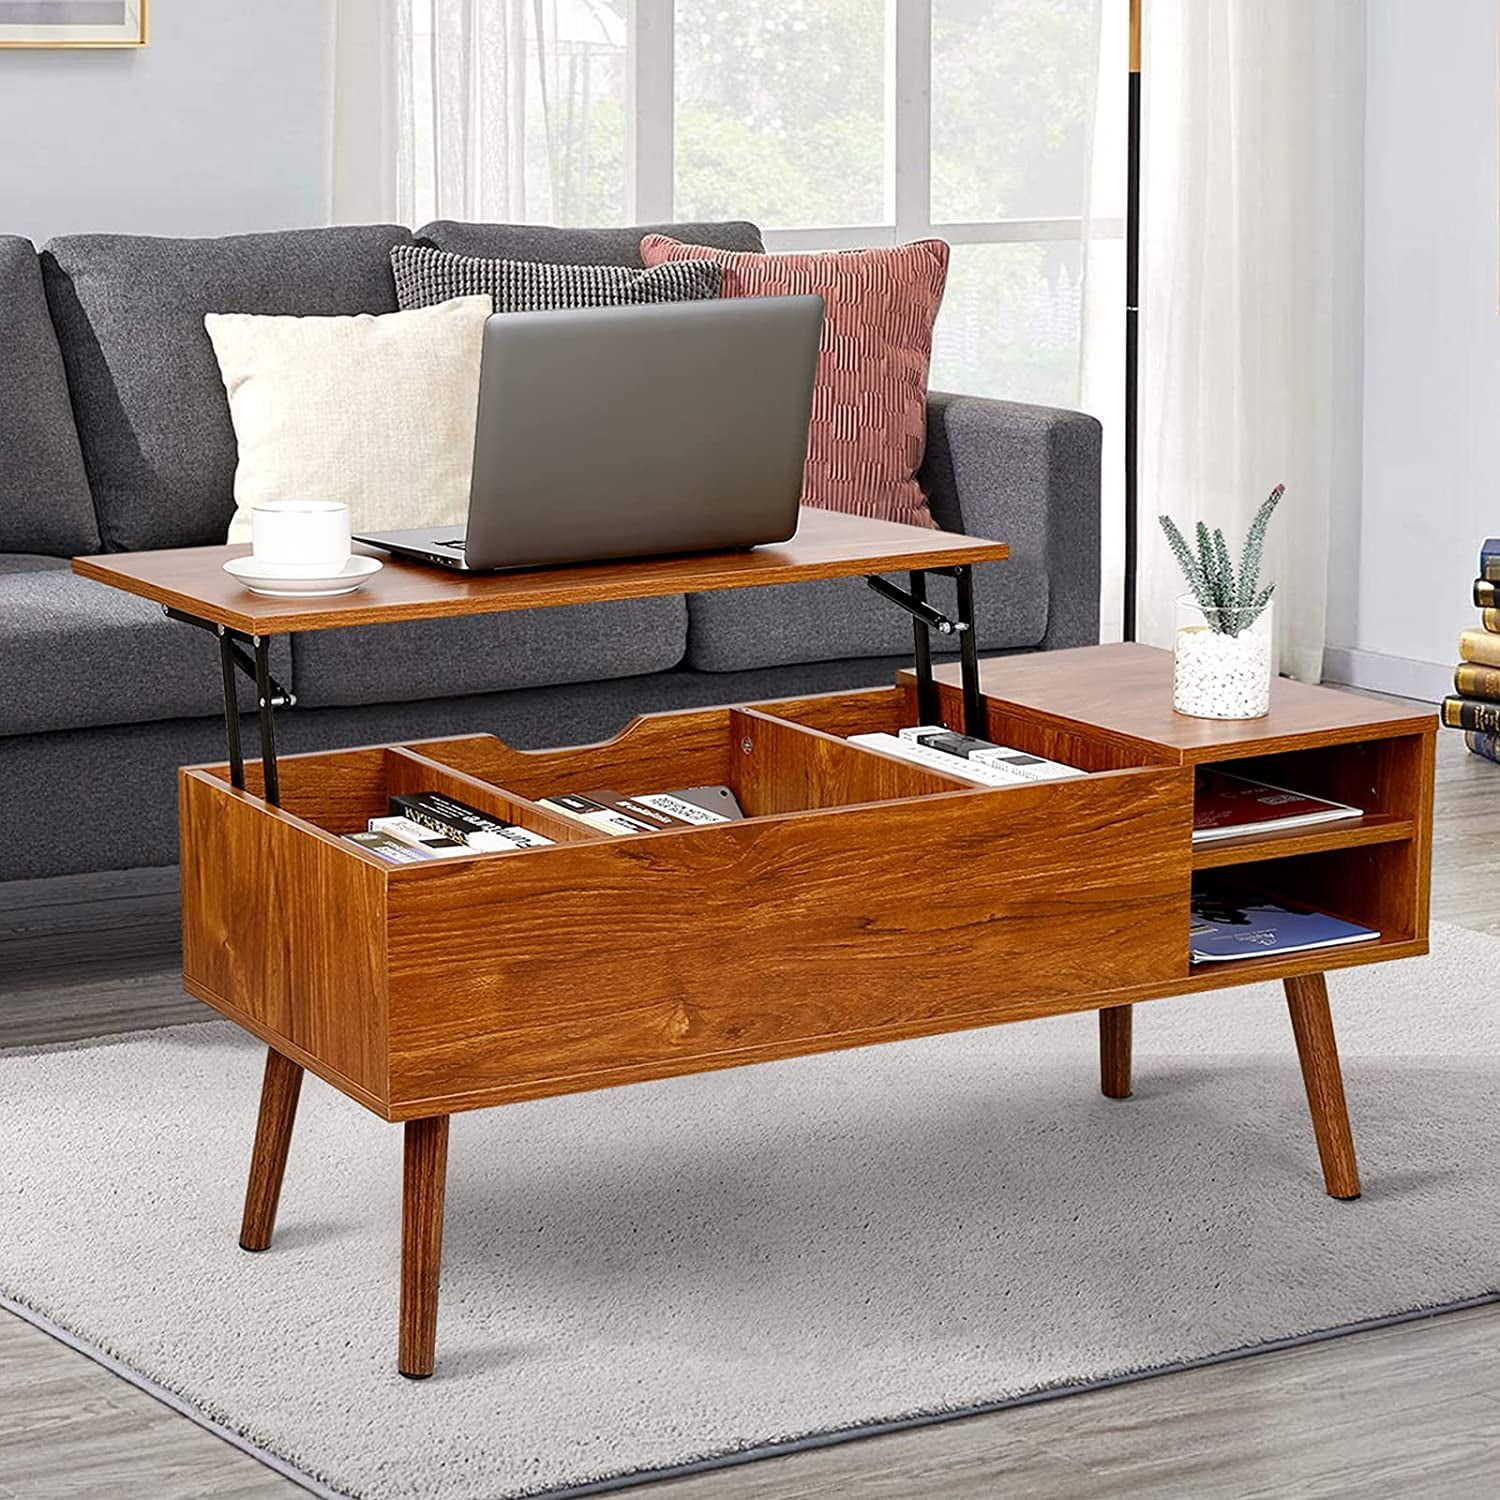 Modern Lift Top Coffee Table With Hidden Compartment Storage,adjustable Pertaining To Lift Top Coffee Tables With Hidden Storage Compartments (View 2 of 15)